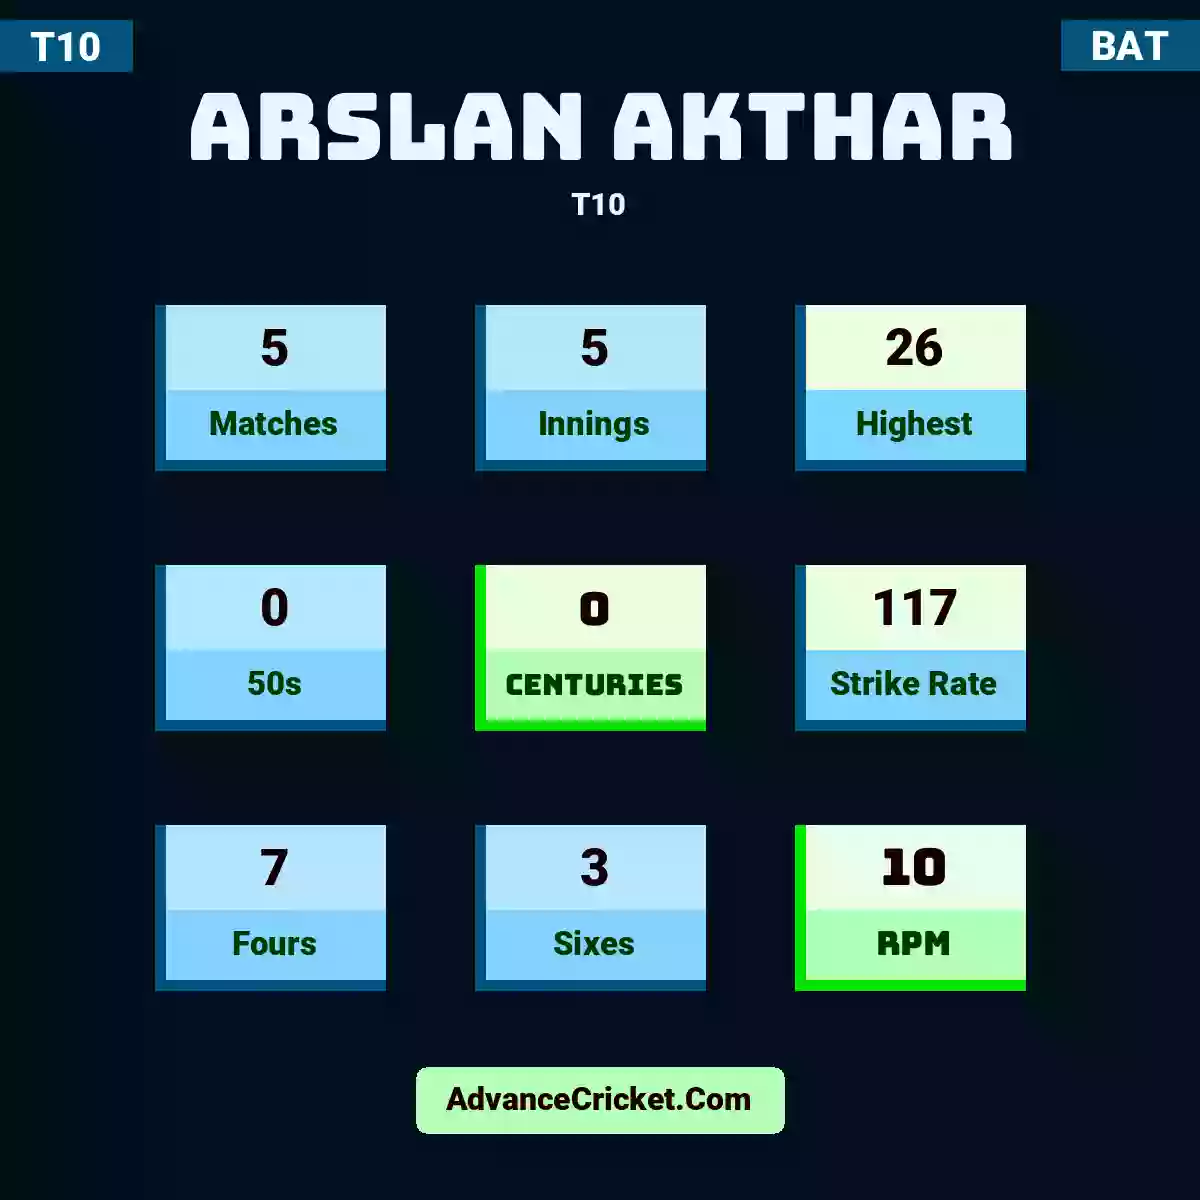 Arslan Akthar T10 , Arslan Akthar played 5 matches, scored 26 runs as highest, 0 half-centuries, and 0 centuries, with a strike rate of 117. A.Akthar hit 7 fours and 3 sixes, with an RPM of 10.